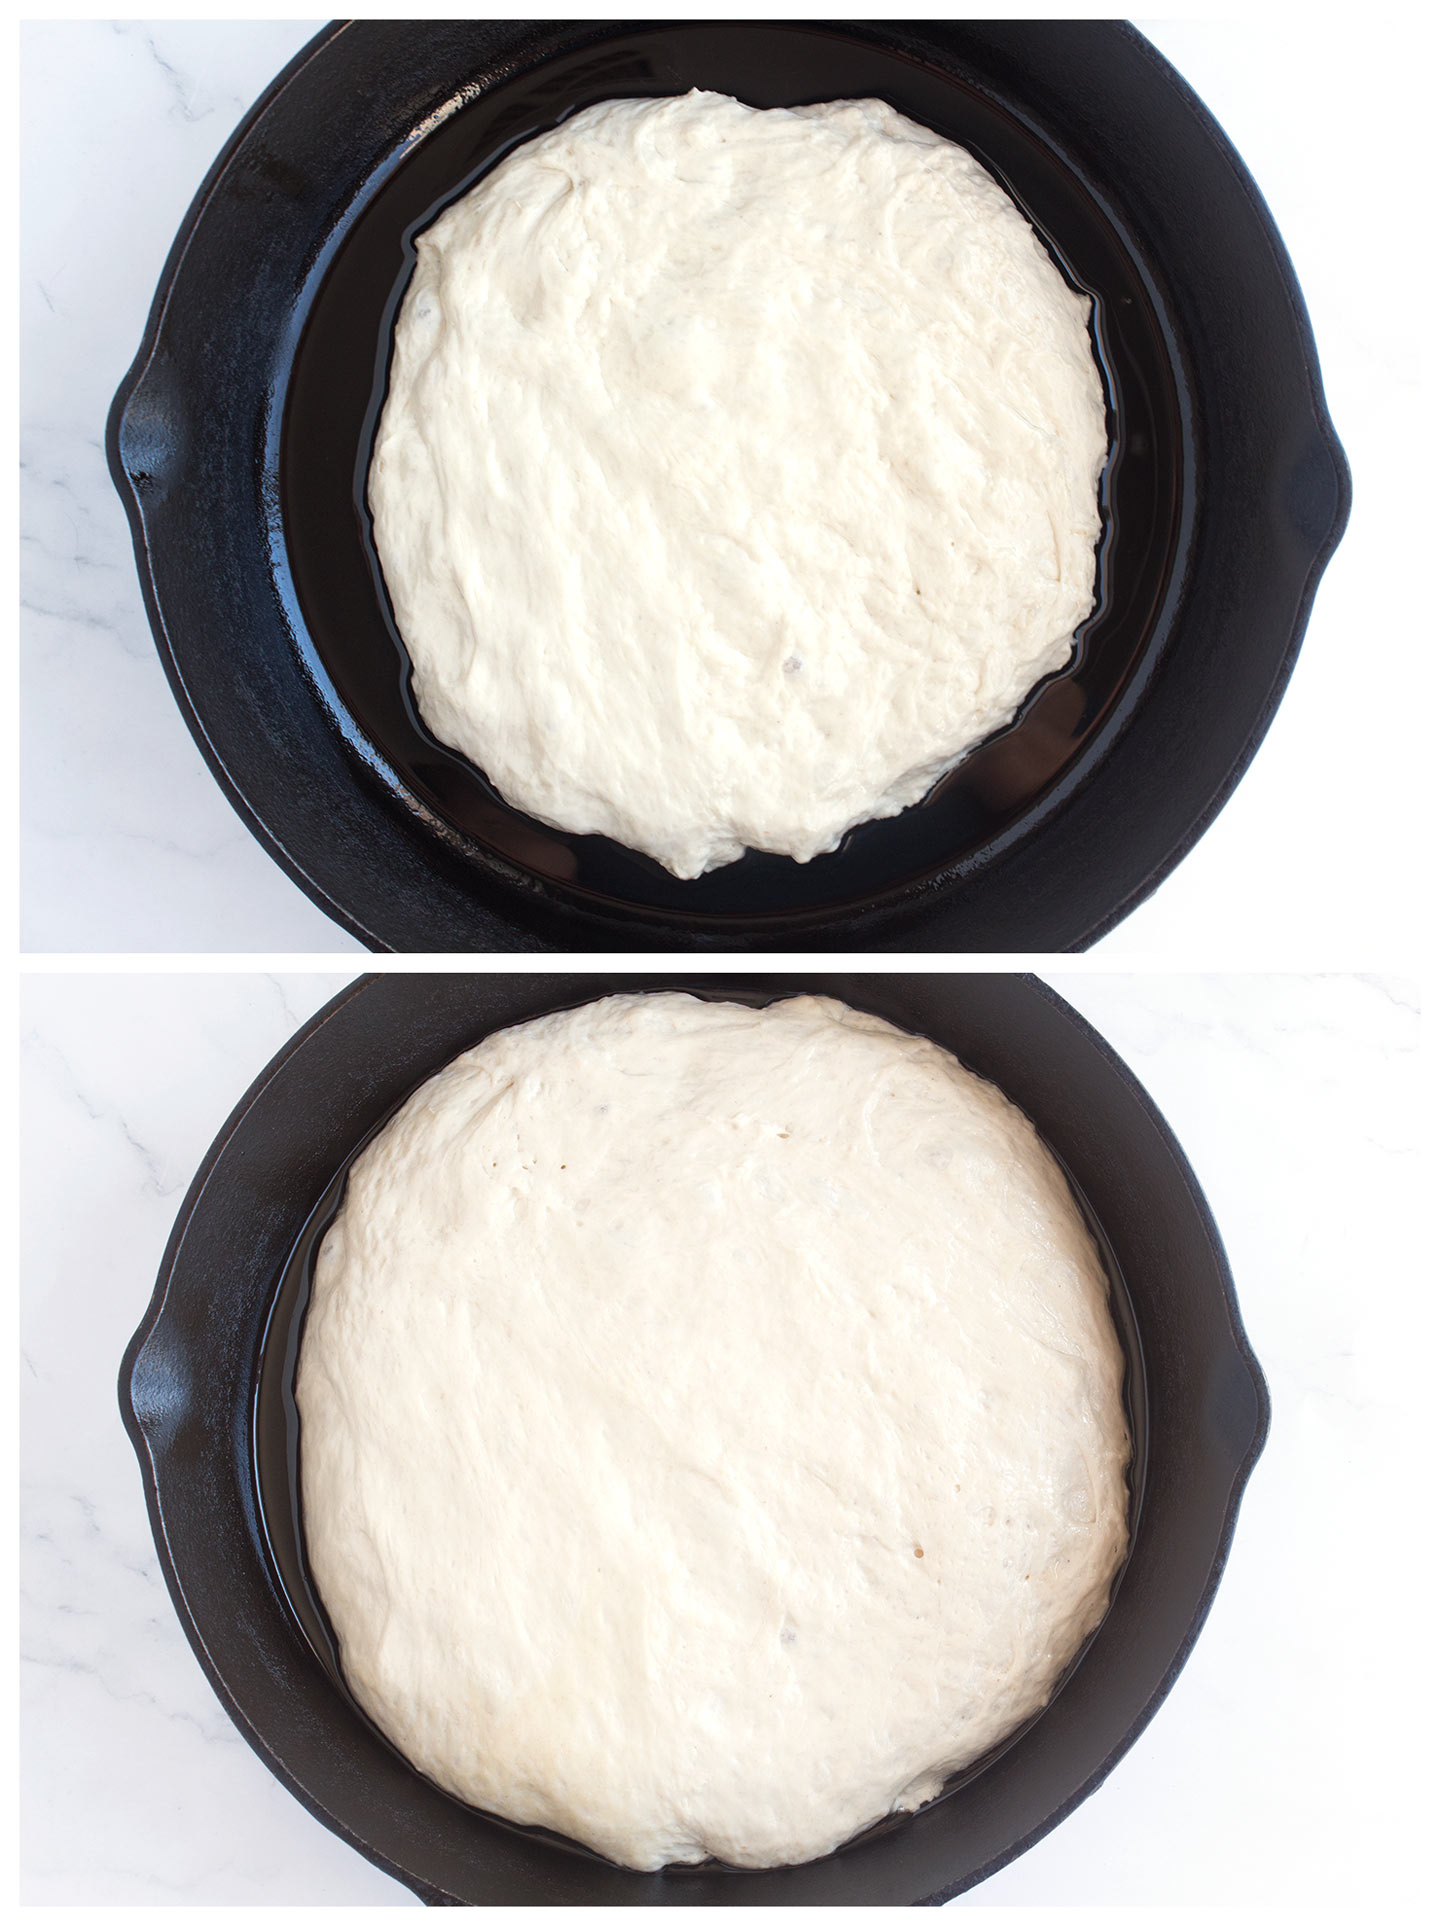 Dough in skillet before and after rising.